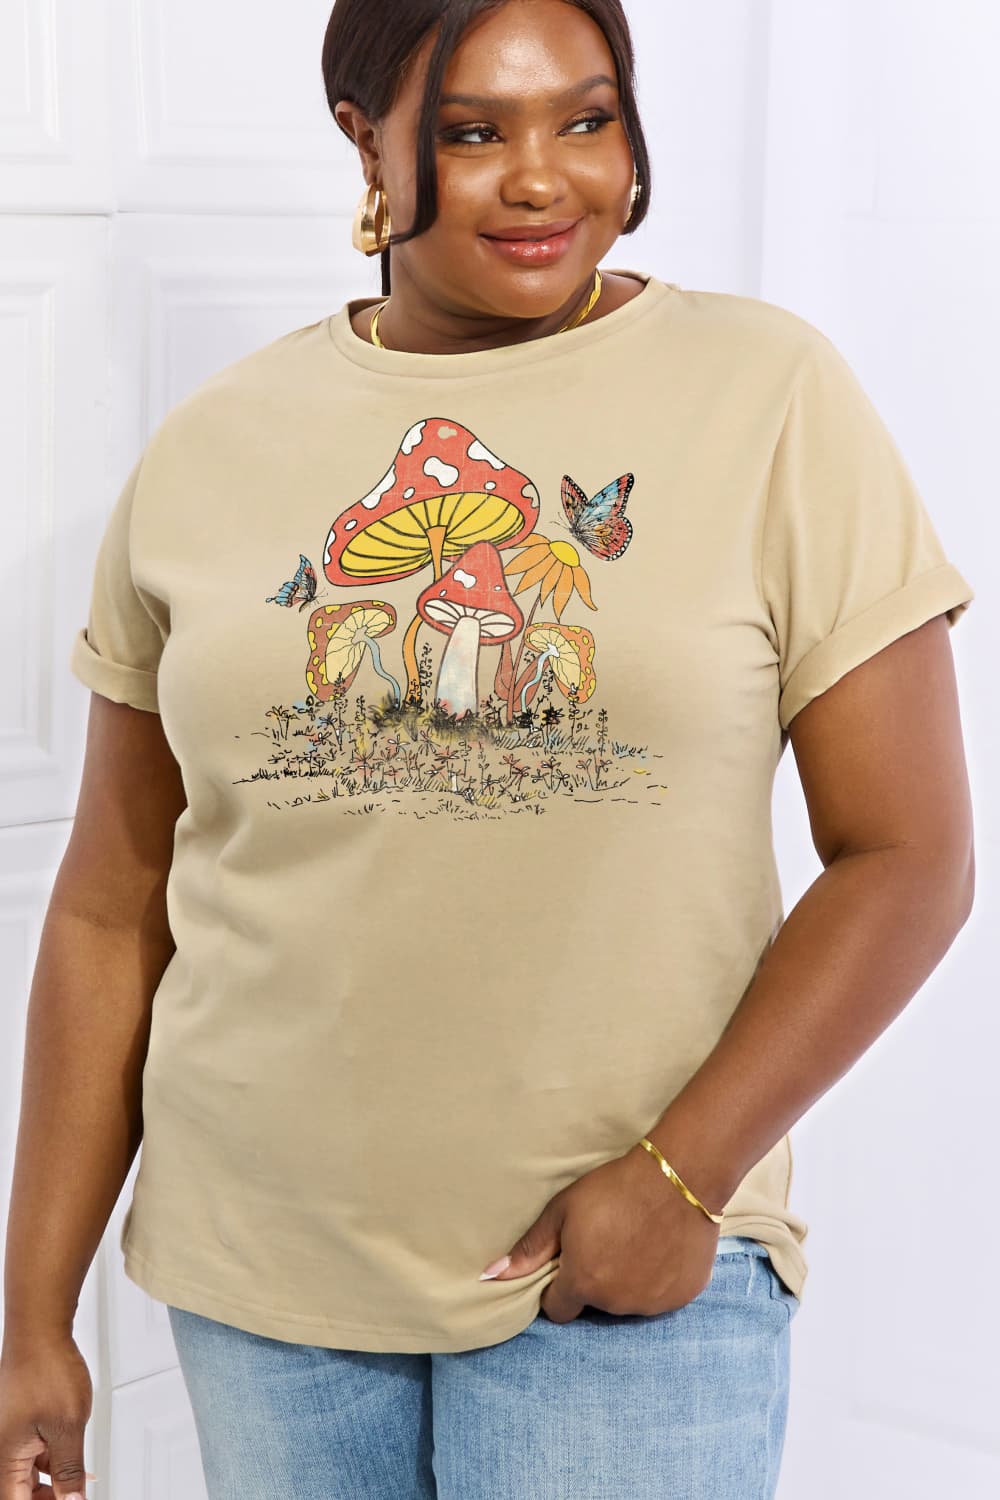 Simply Love Mushroom & Butterfly Graphic Cotton T-Shirt